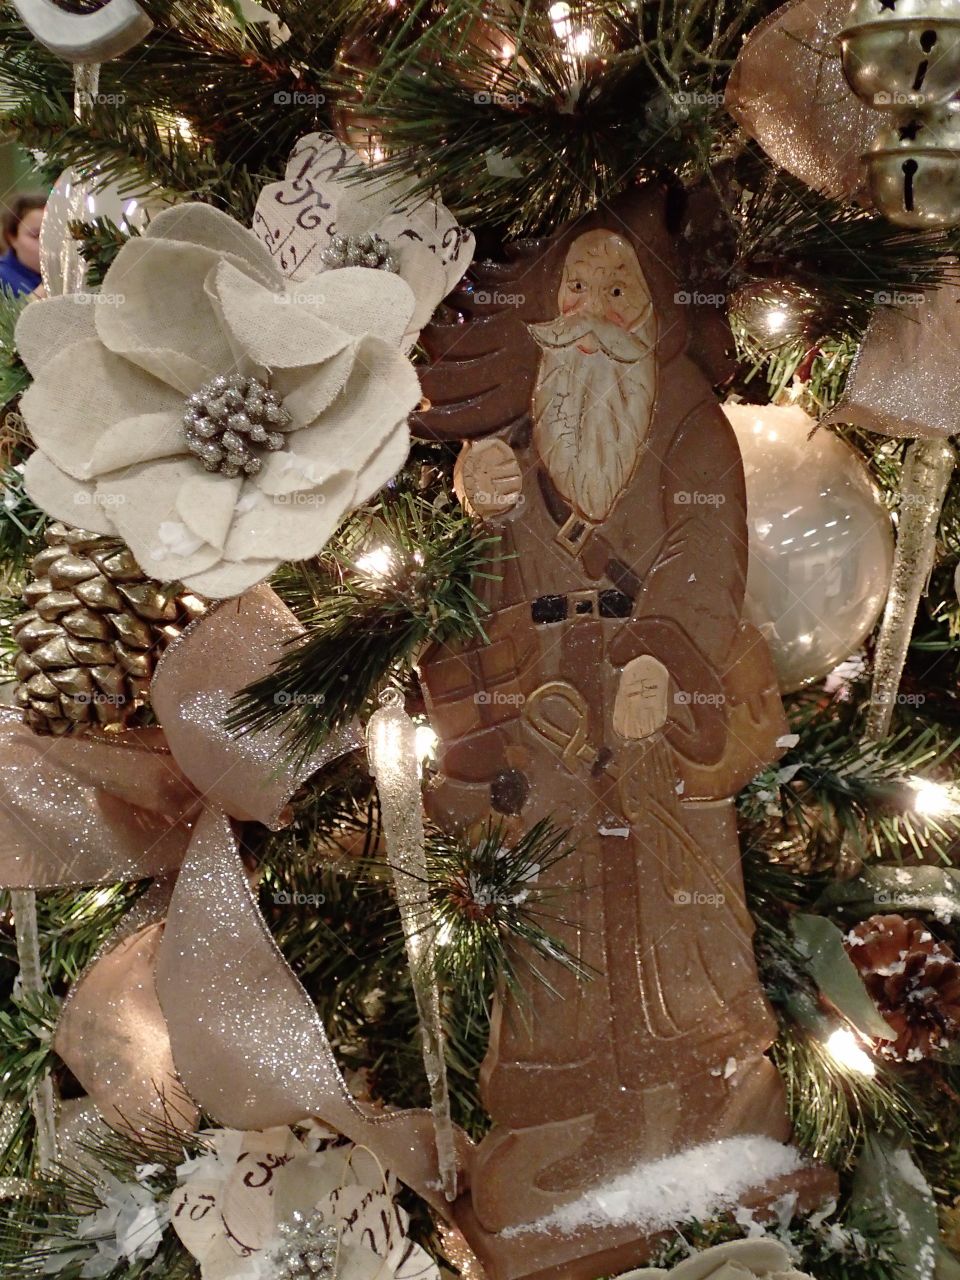 An old traditional ceramic Santa Claus ornament hangs from a lighted Christmas tree. 